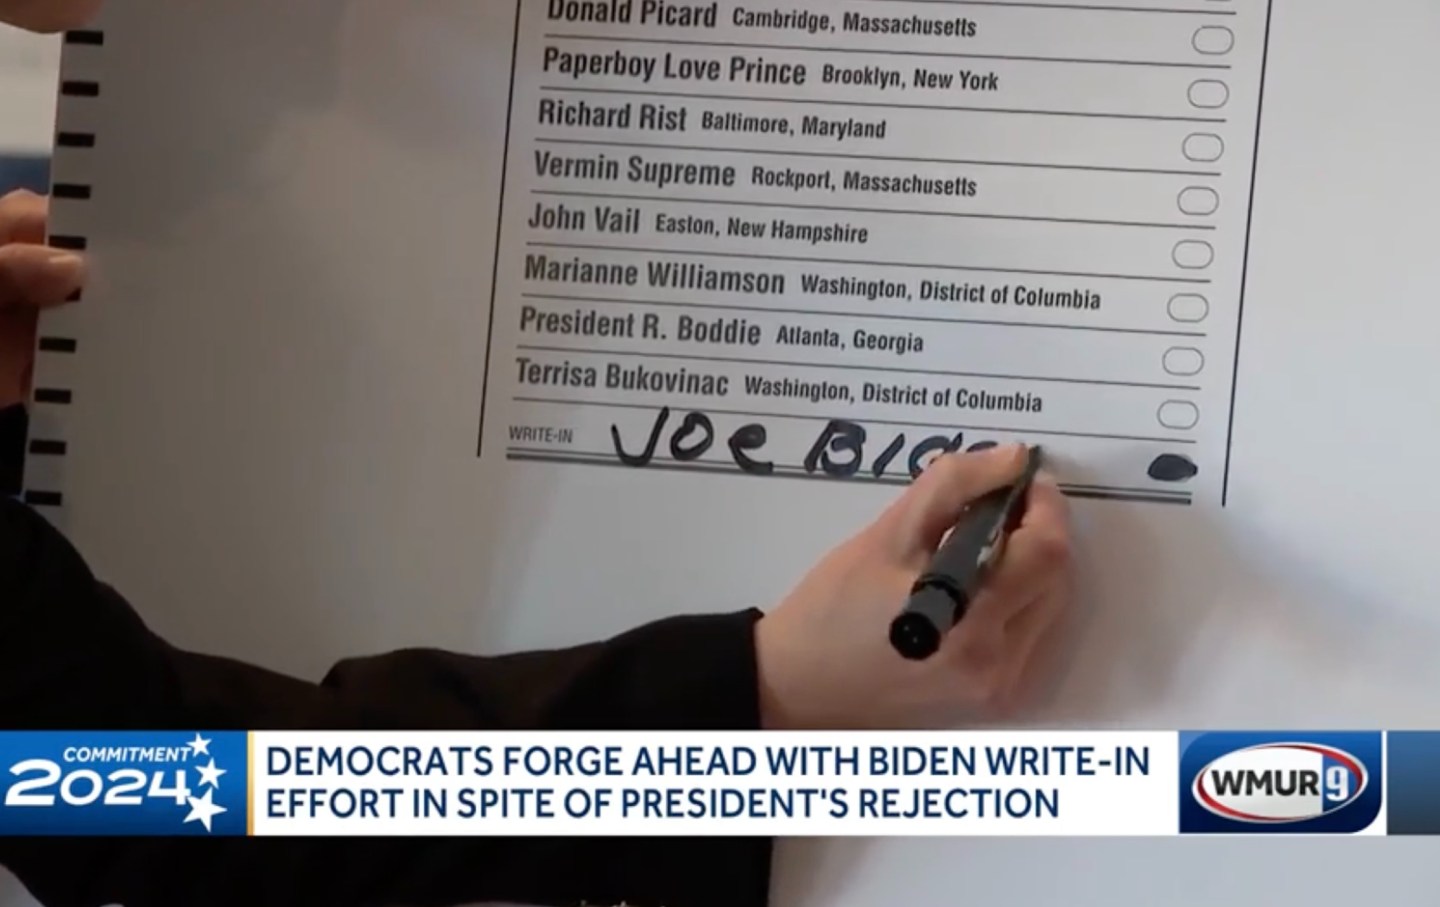 A demonstration of how to write in Joe Biden on the New Hampshire election ballot.